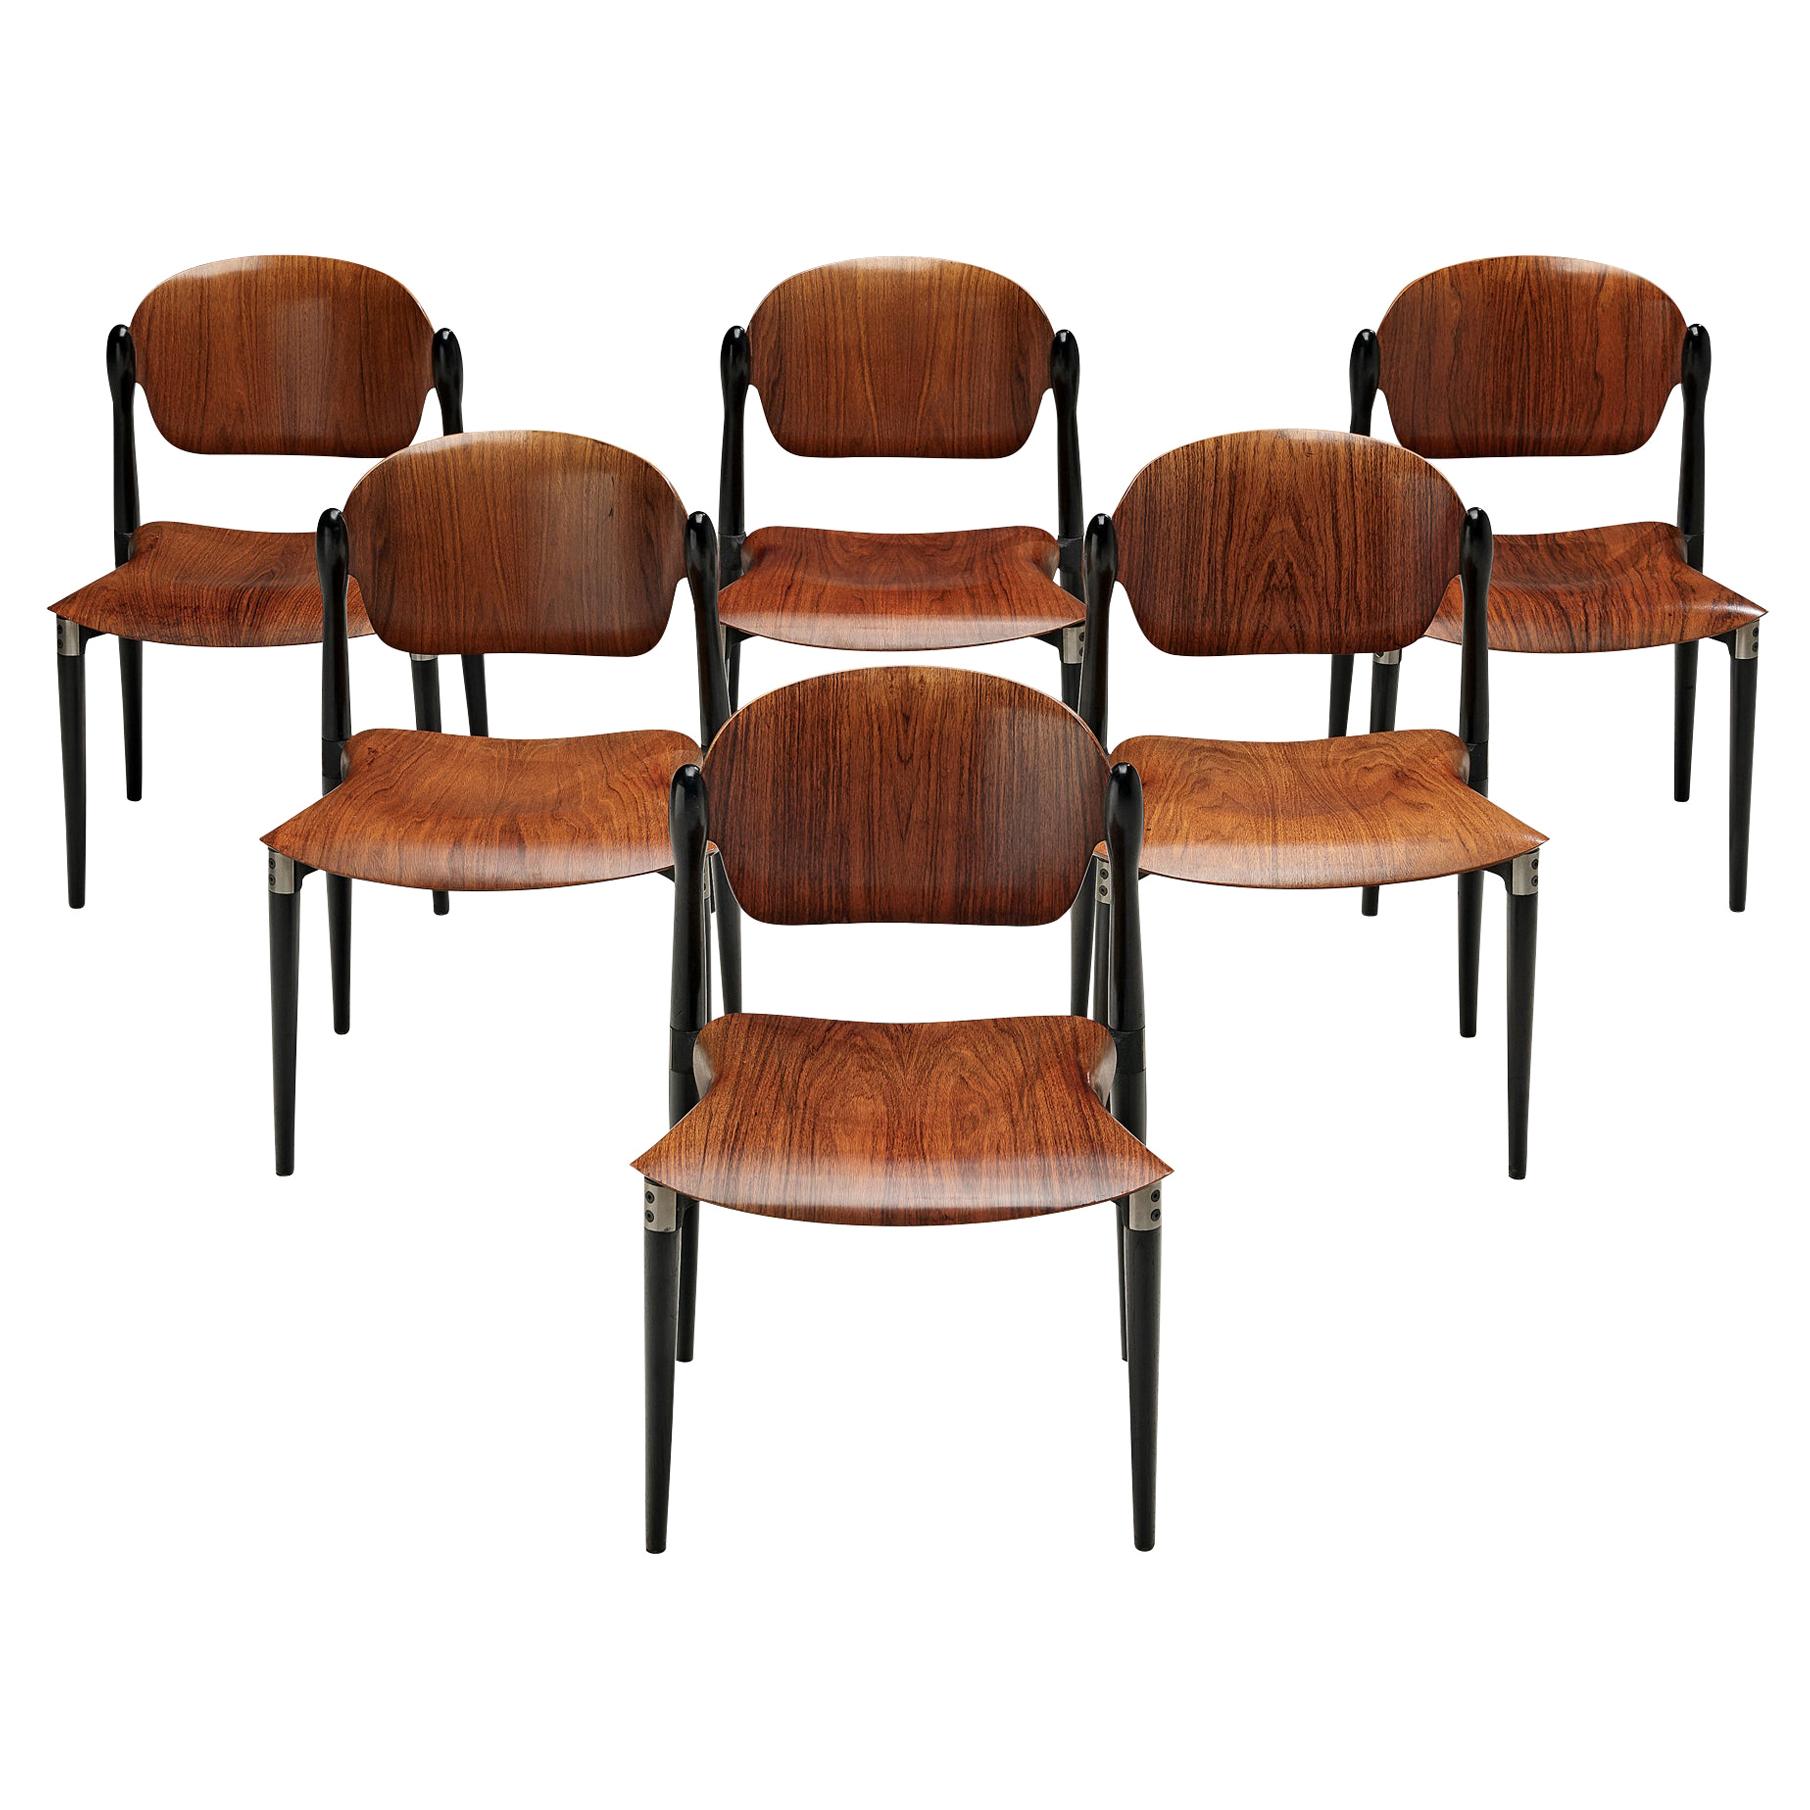 Eugenio Gerli Set of Six Early 'S83' Chairs for Tecno